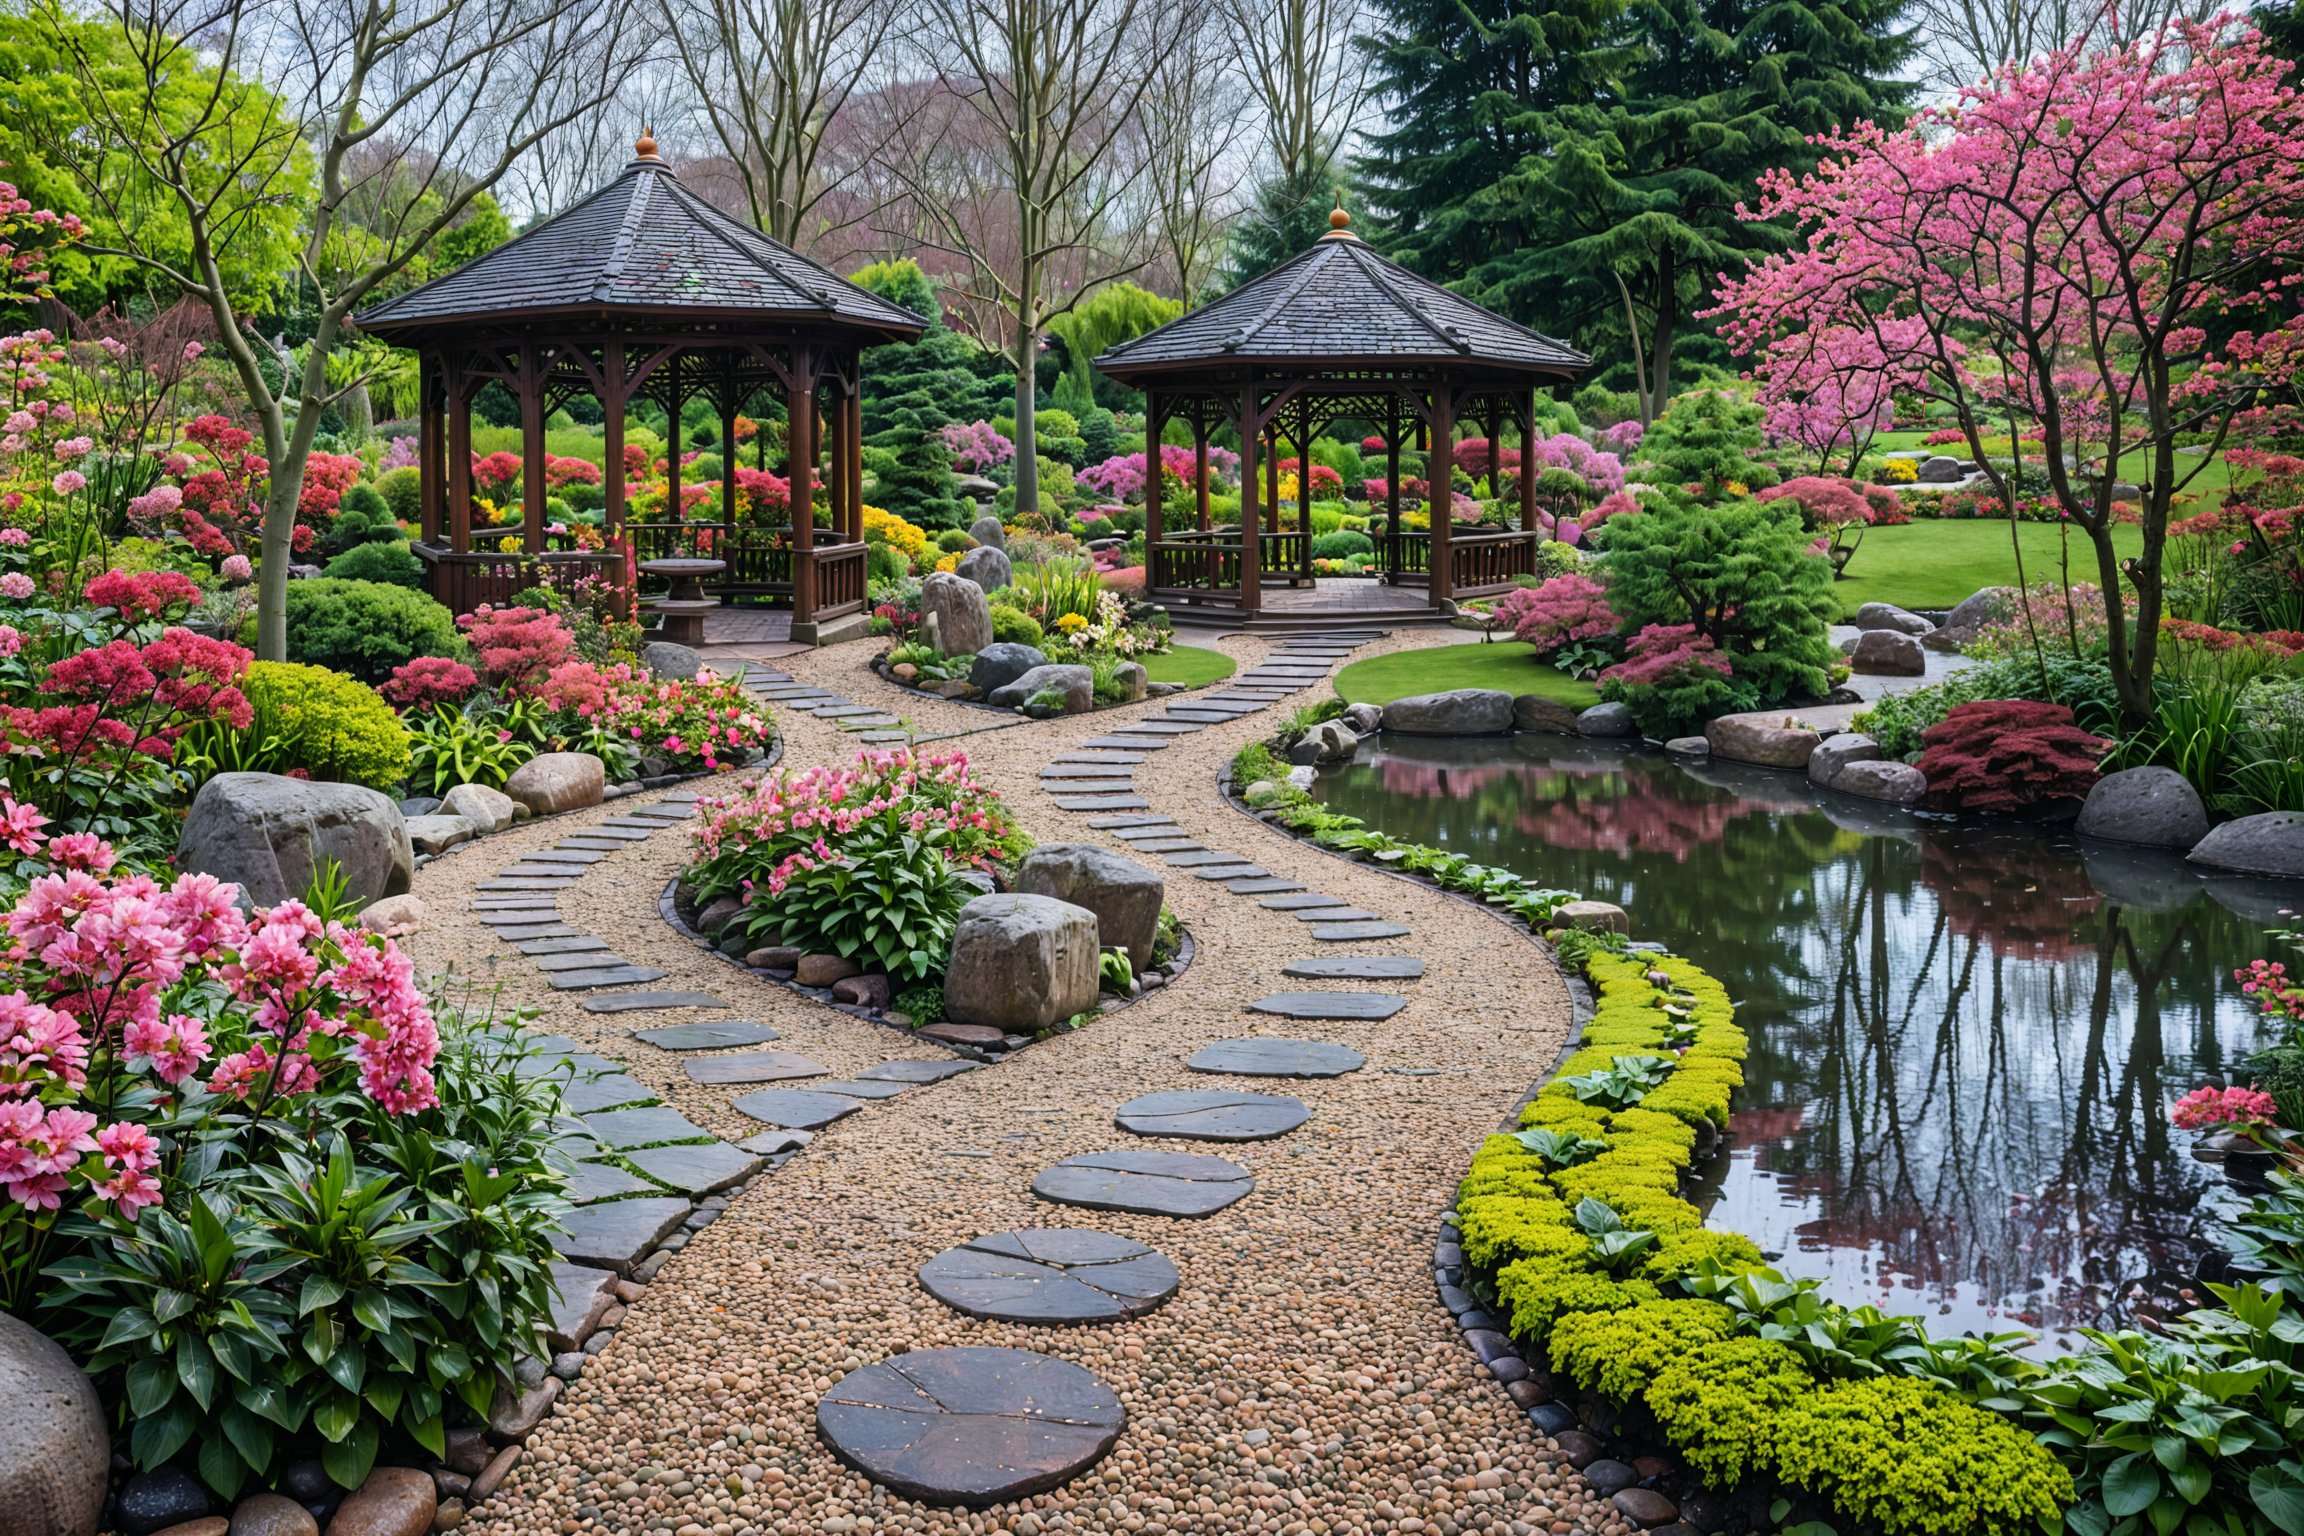 A serene and meticulously designed garden. A calm pond, bordered by stepping stones, is the central feature, reflecting the surrounding greenery and a traditional wooden gazebo. On the left, a tree with vibrant pink blossoms stands tall, contrasting with the leafless branches of another tree. The garden is adorned with a variety of plants, shrubs, and flowers, all neatly arranged. A stone pathway winds its way through the garden, leading to the gazebo. The backdrop is a dense forest, adding depth and a sense of seclusion to the scene.